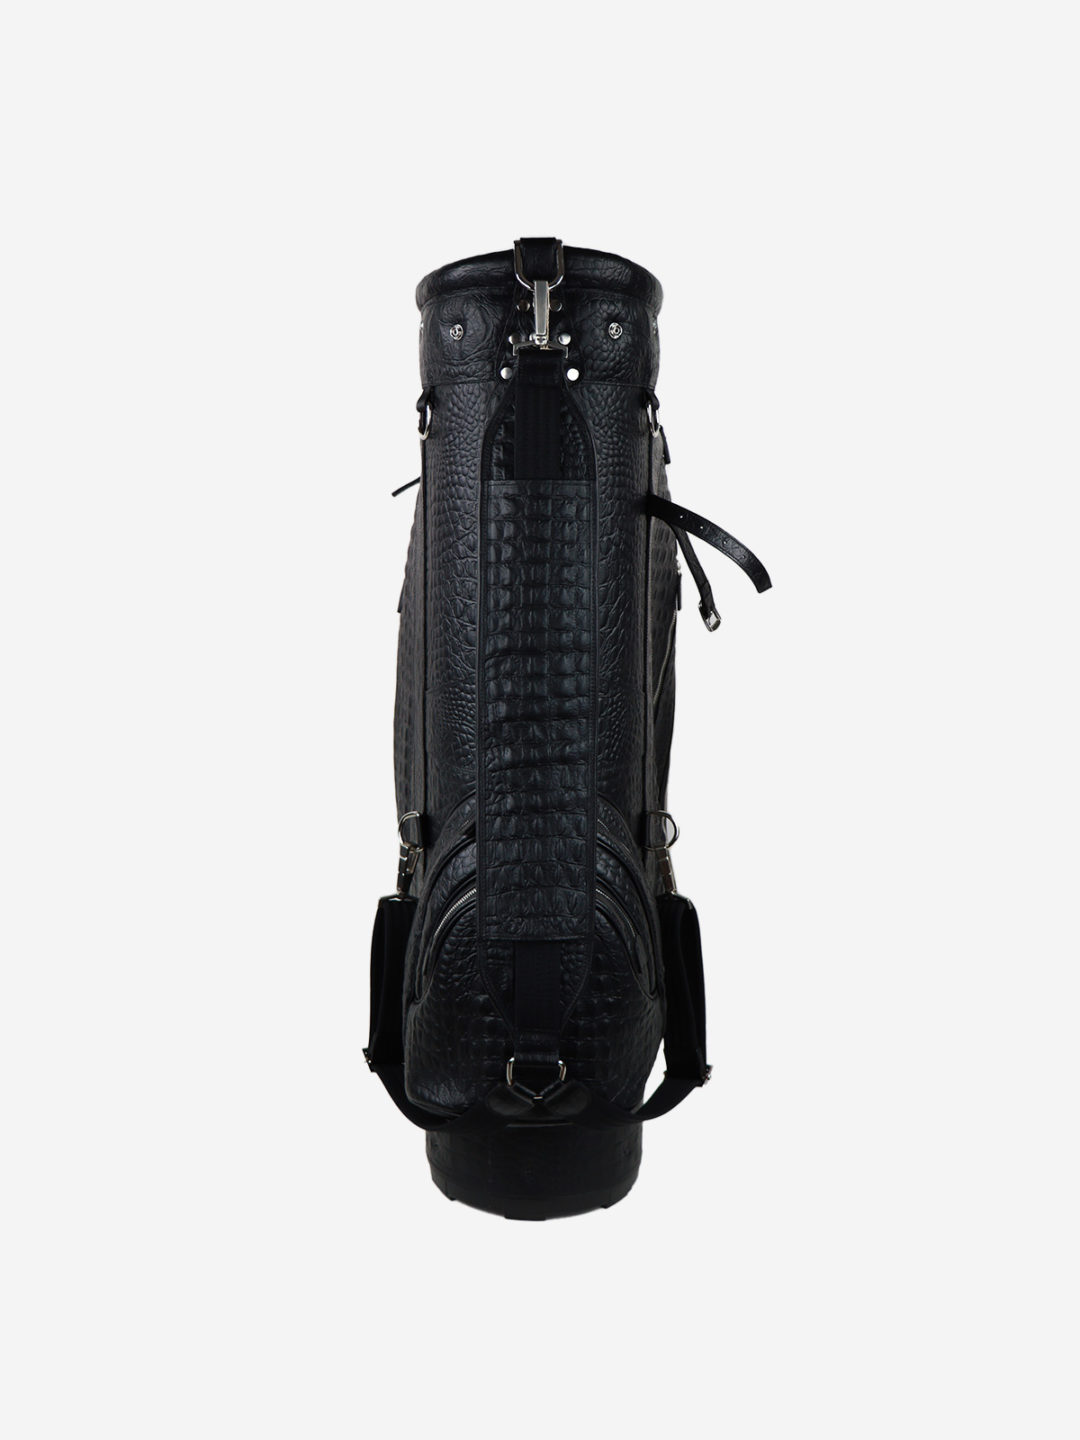 Wild Golf Bag - Handmade in Italy with vegetable tanned leather